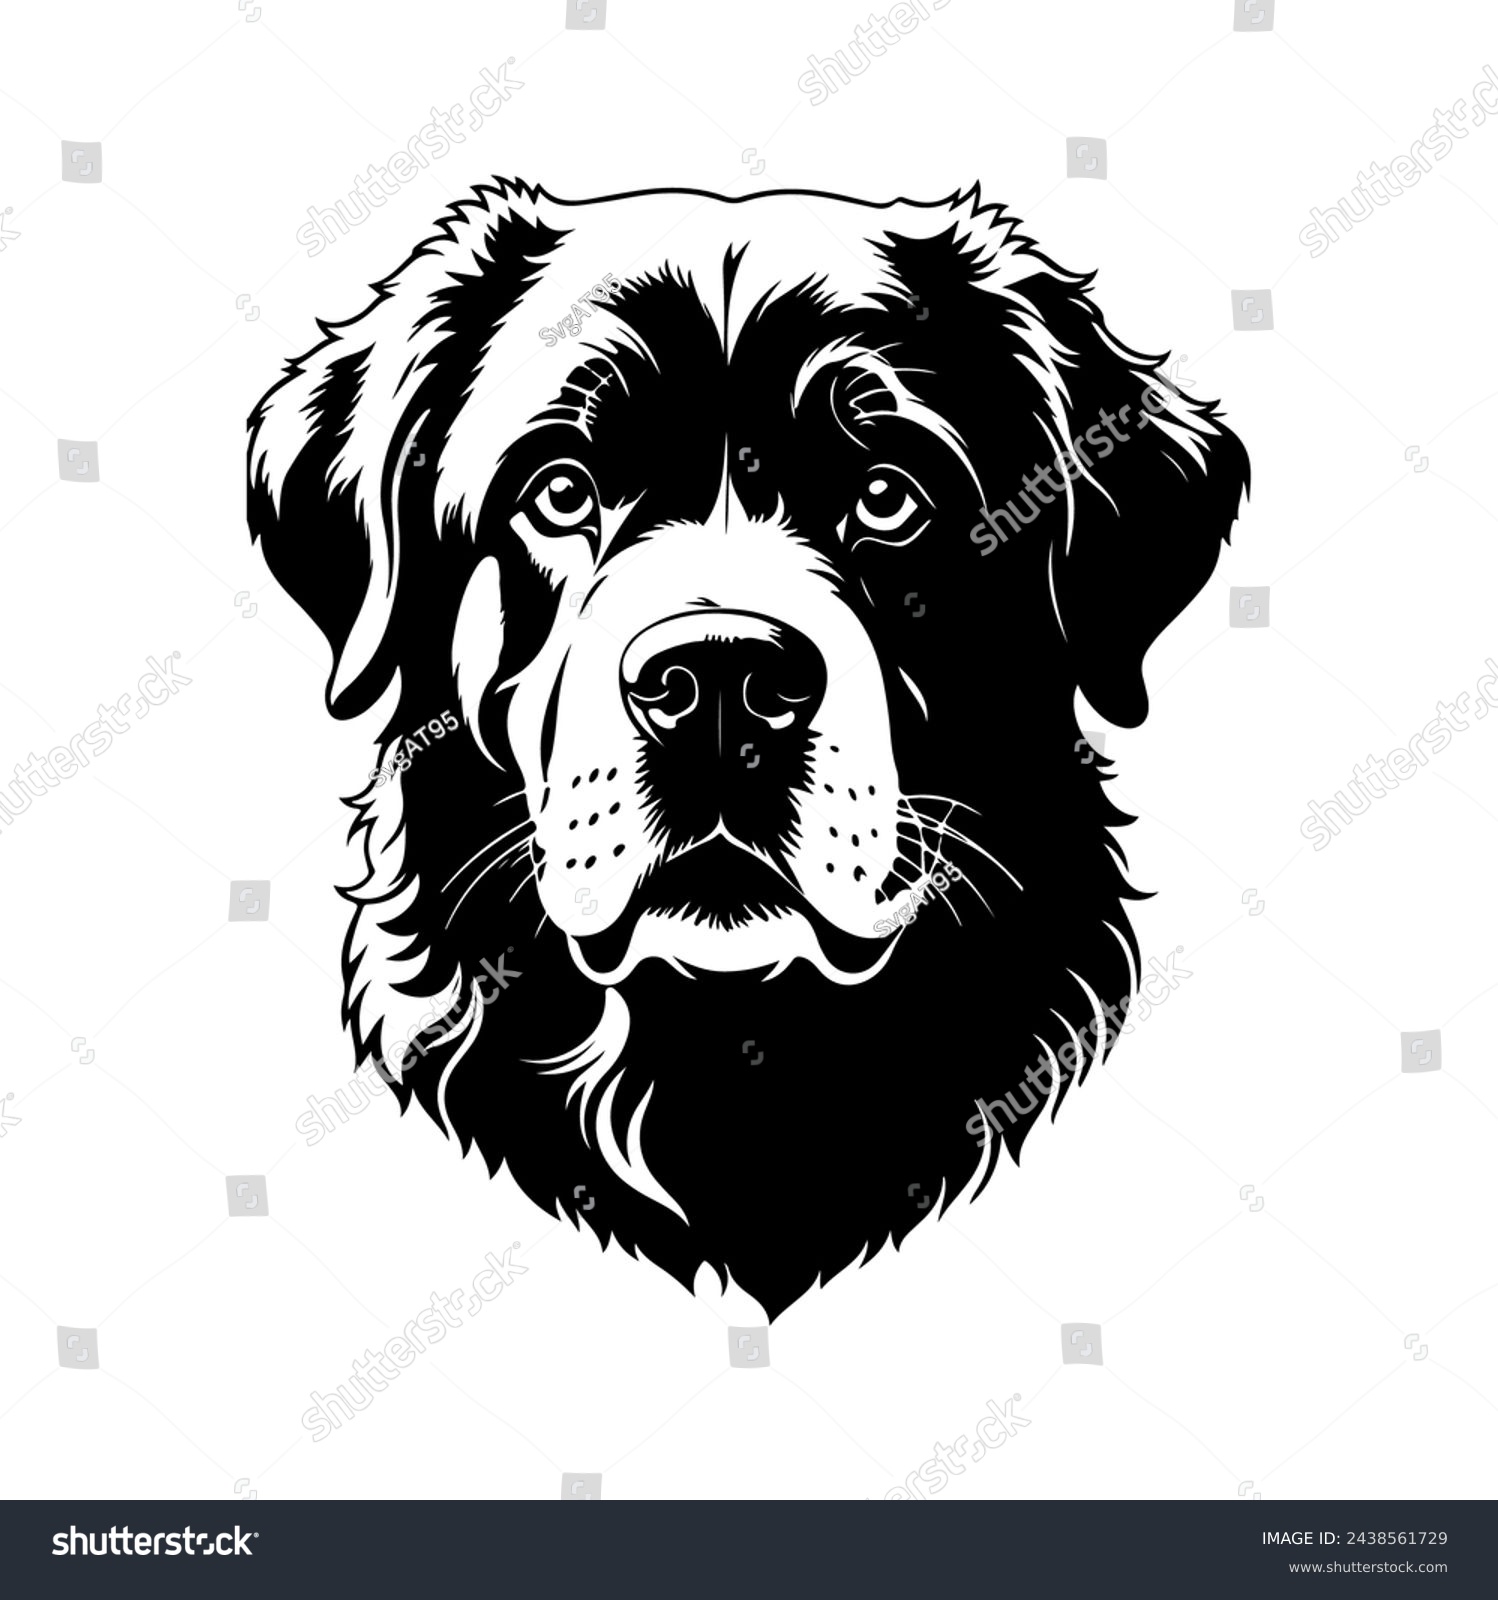 SVG of Portrait of a Newfoundland Dog Vector isolated on white background, Dog Silhouettes. svg